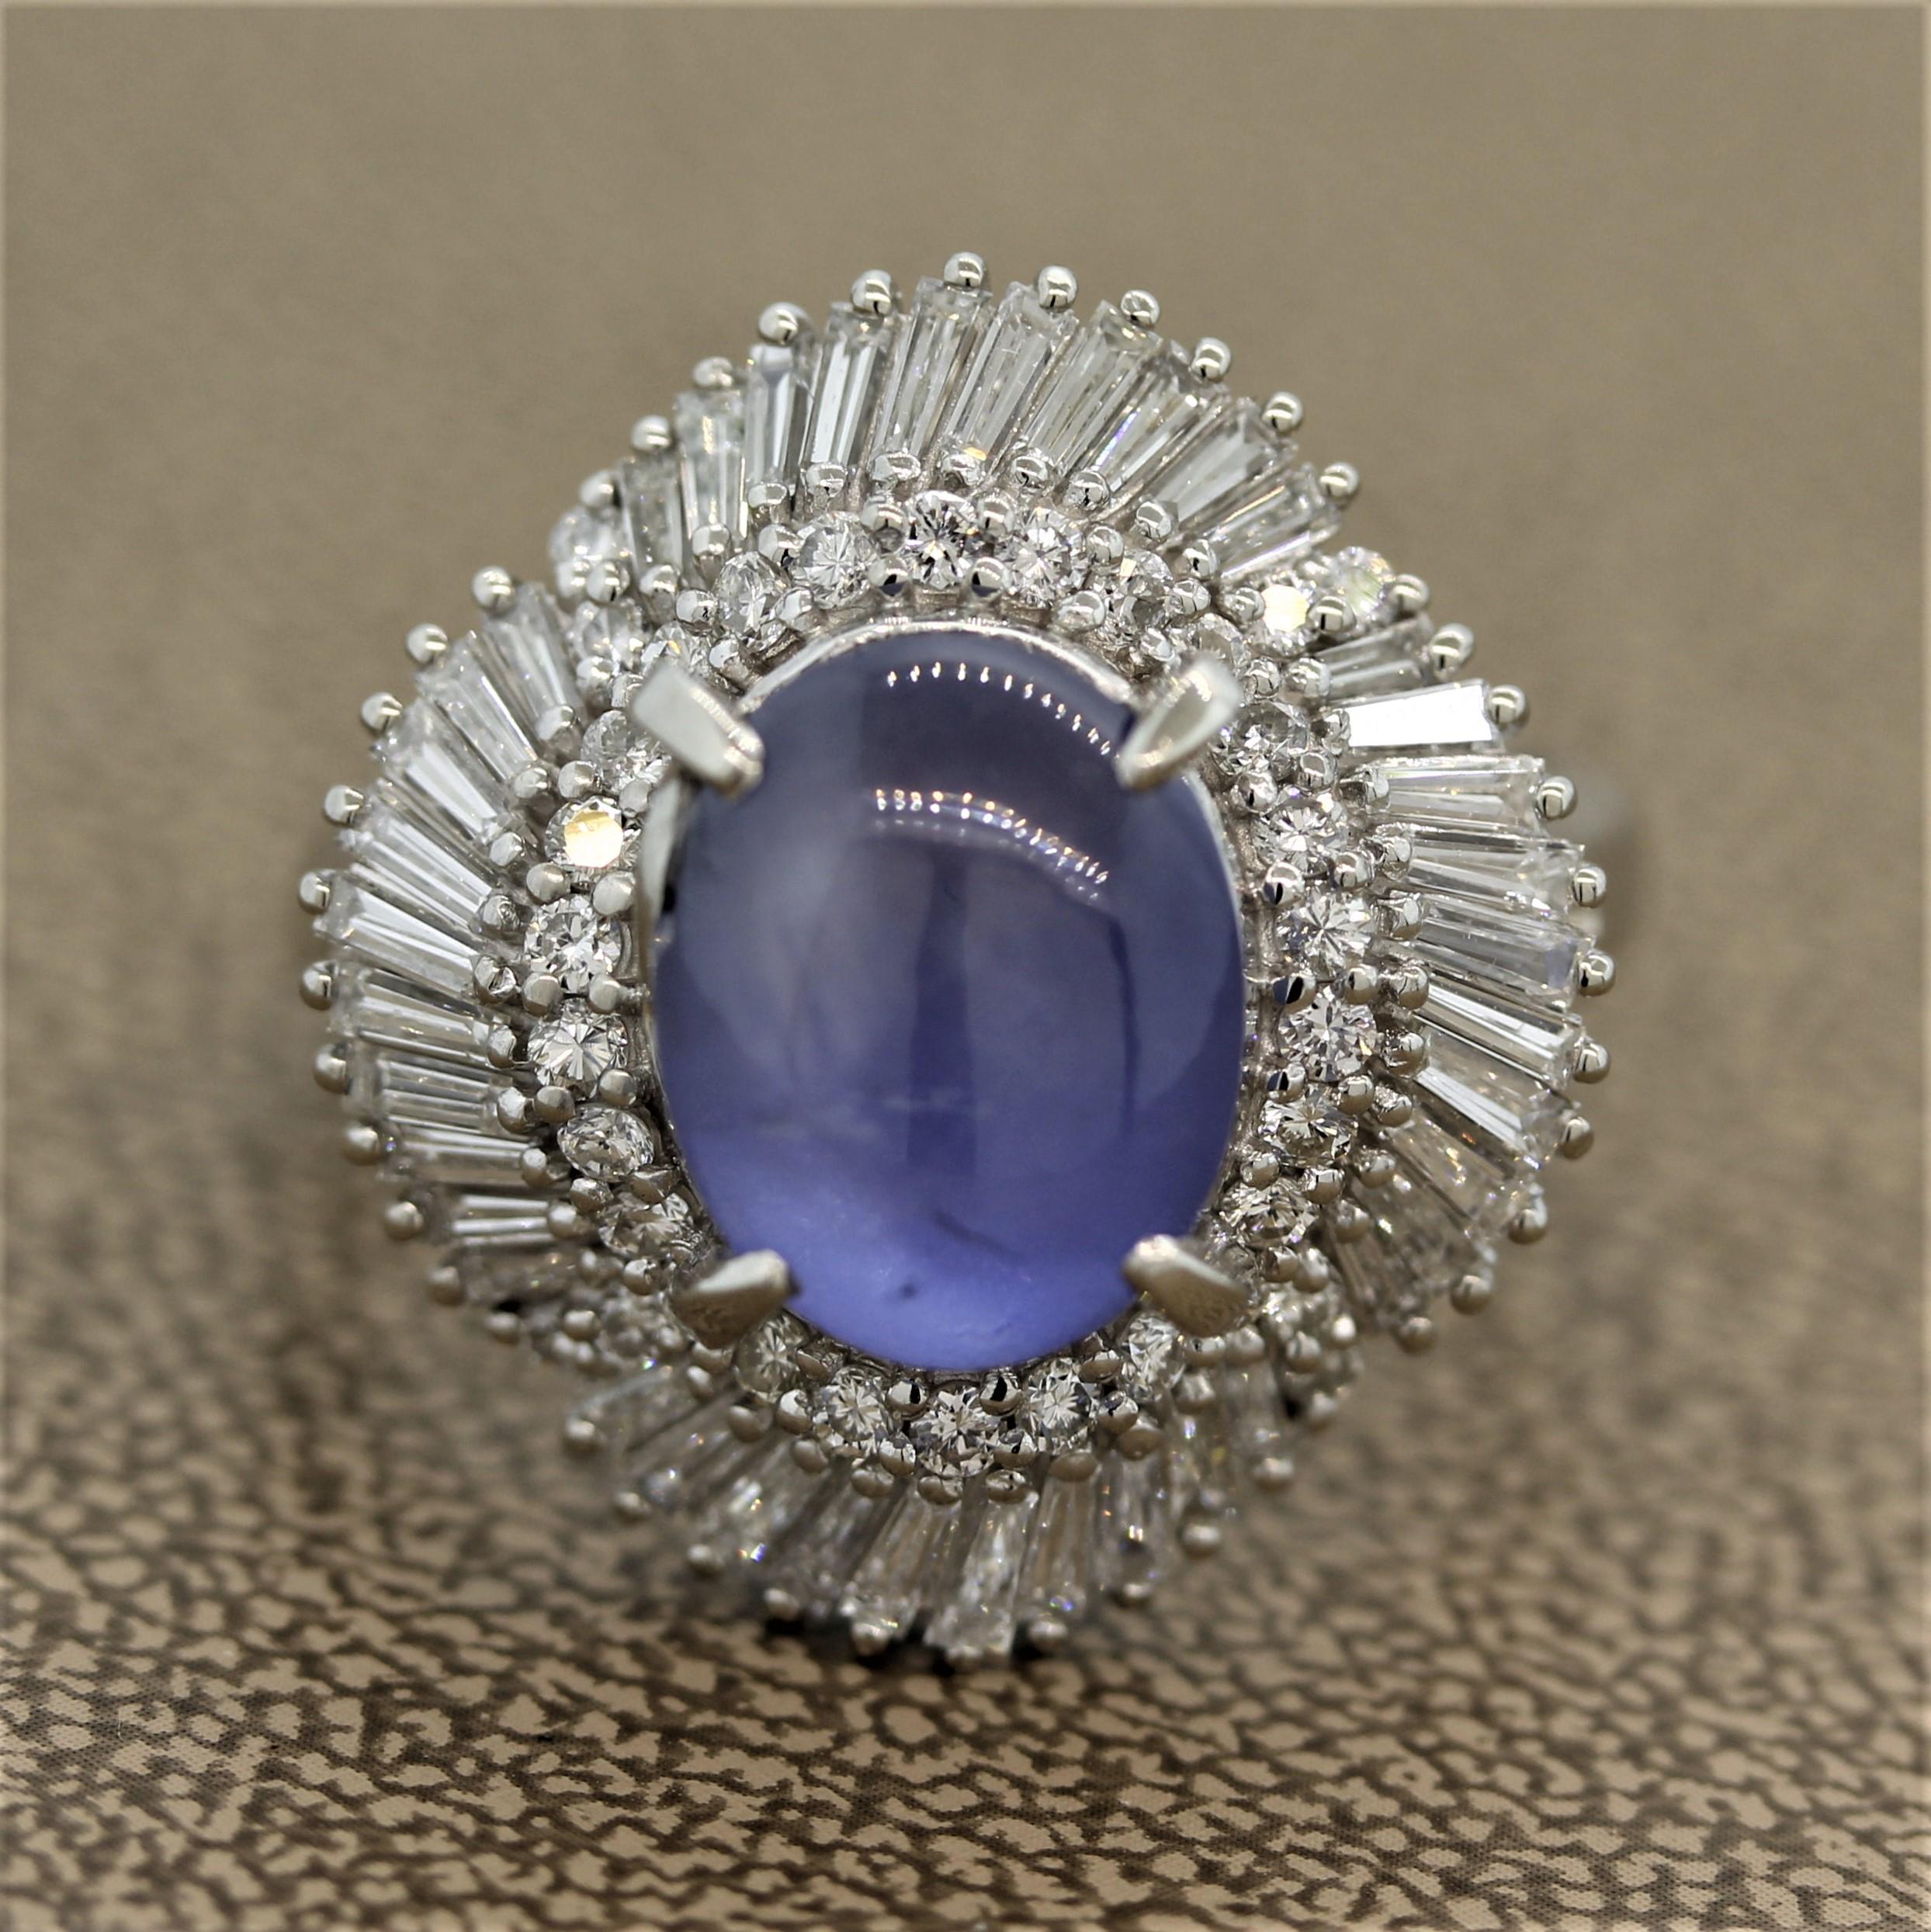 An elegant ring featuring a fine blue star sapphire weighing 9.71 carats. It is a pleasant blue color with a six-rayed star on its top when a light hits it. It is surrounded by 1.53 carats of round brilliant and baguette cut diamonds set in a